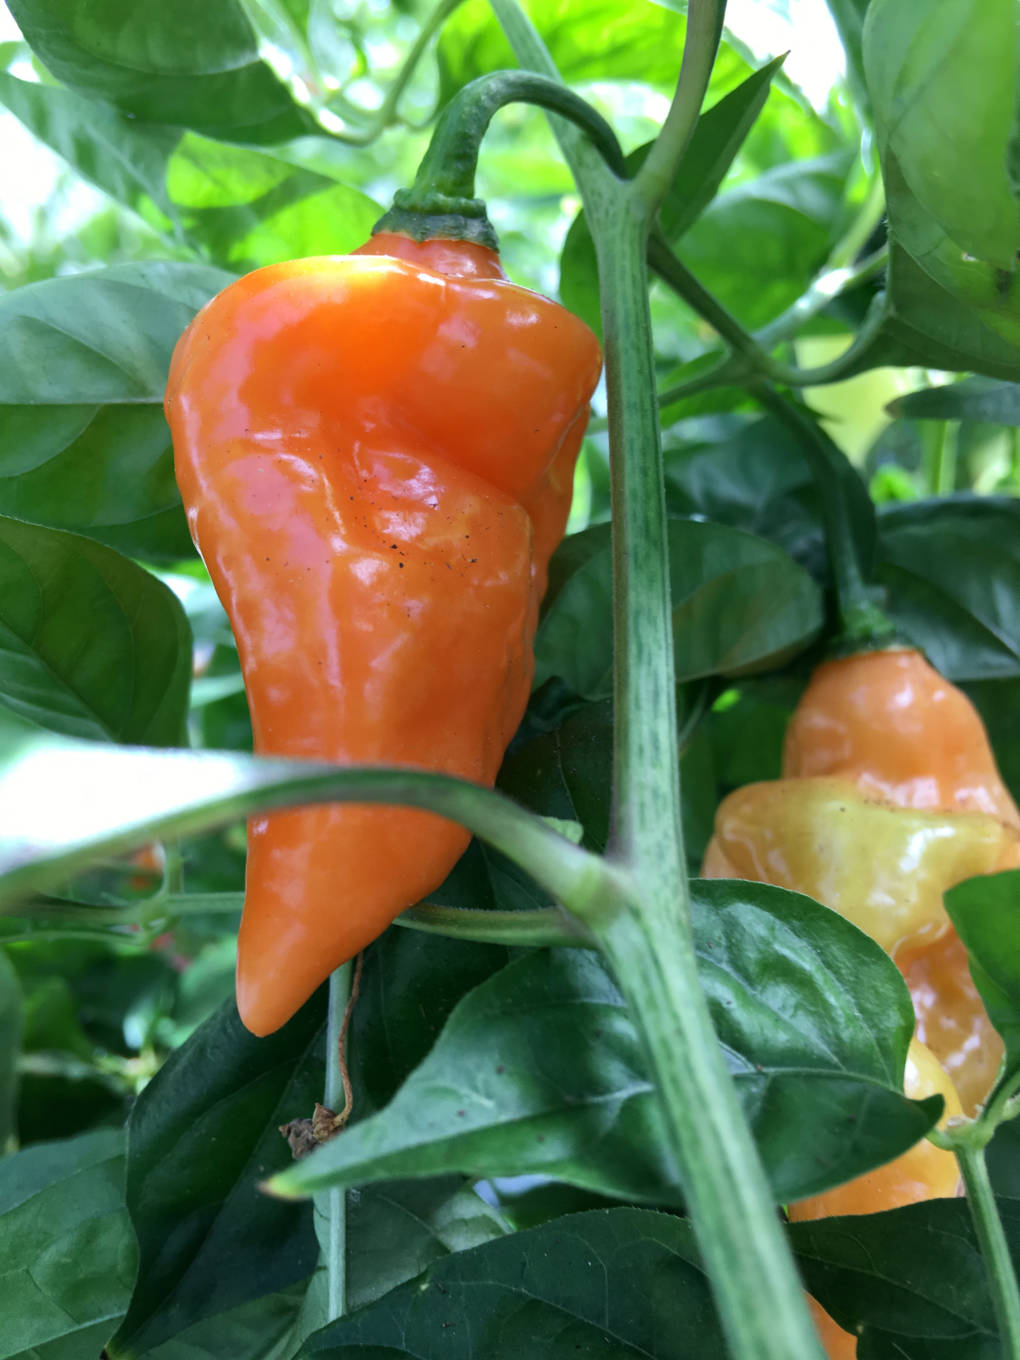 Cornell plant breeder Michael Mazourek created the Habanada as part of his doctoral research. He got the idea after discovering a rogue heatless pepper whose genetics behaved very differently from a naturally sweet pepper like the Bell.